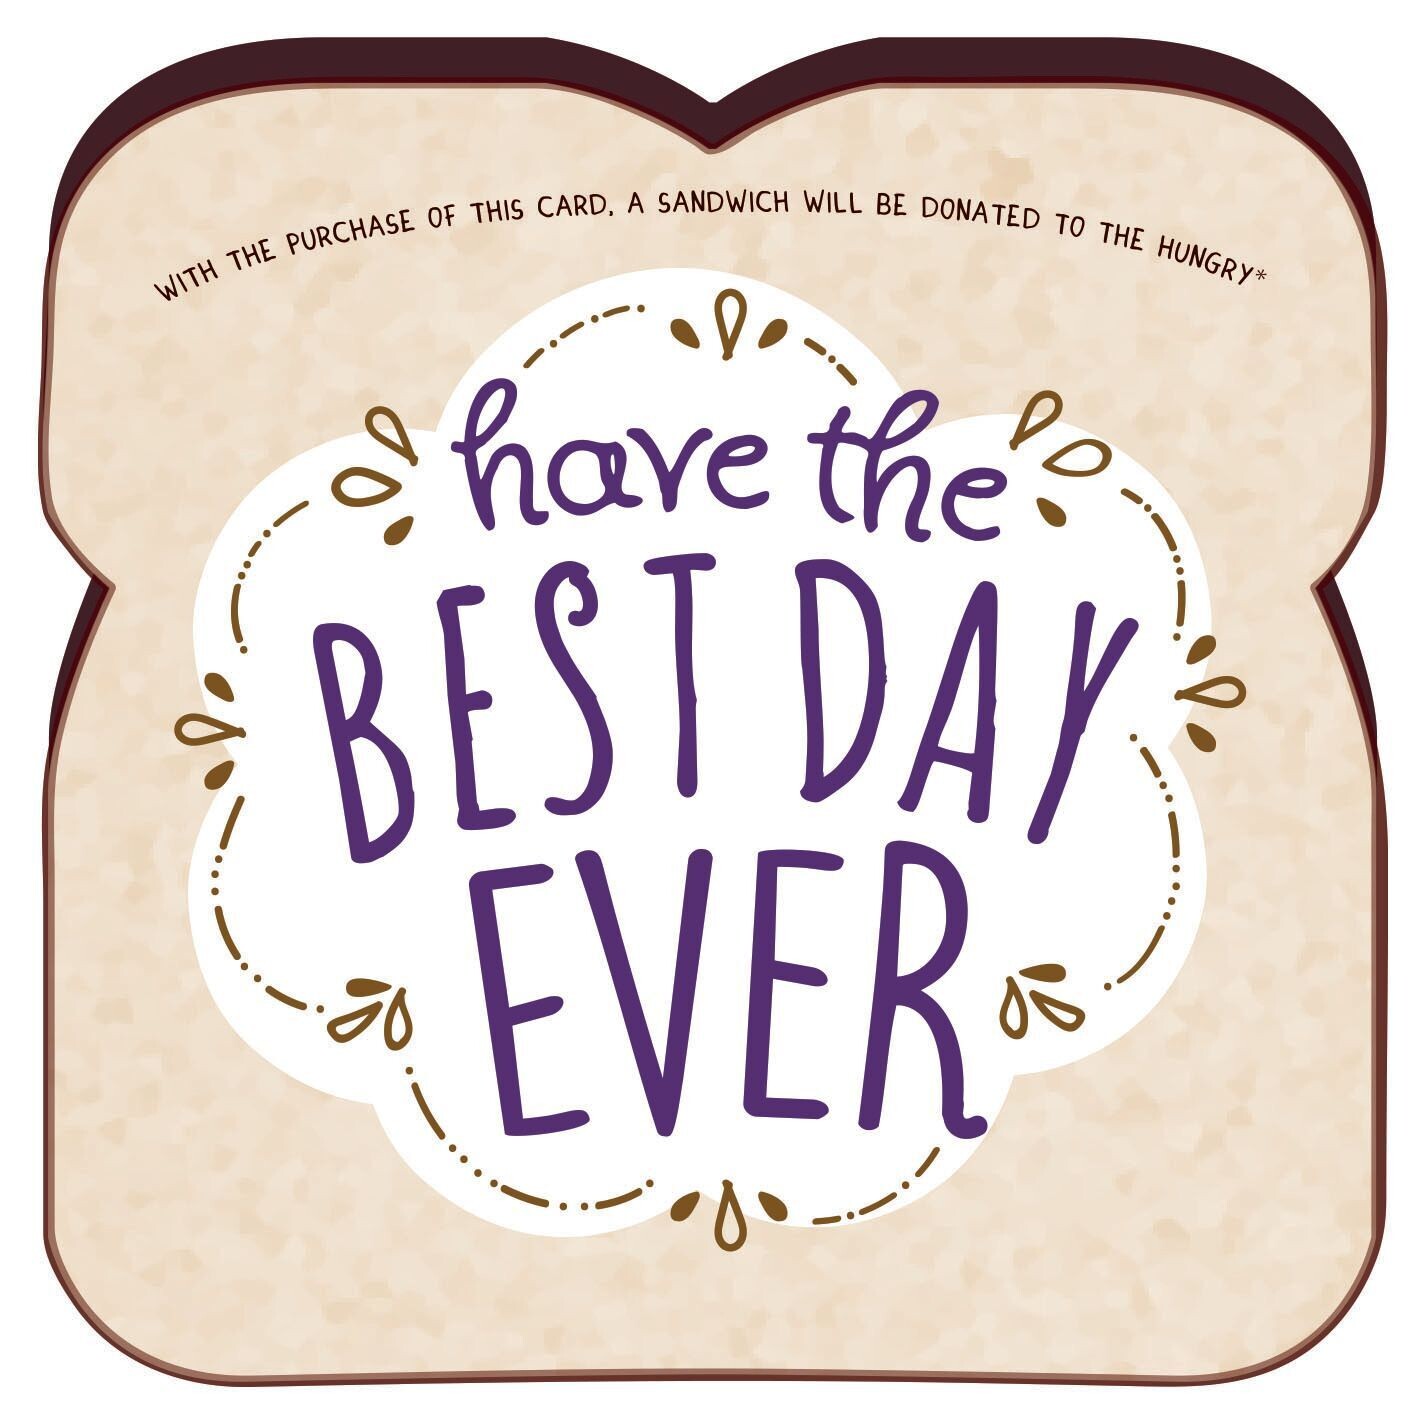 HAVE THE BEST DAY EVER